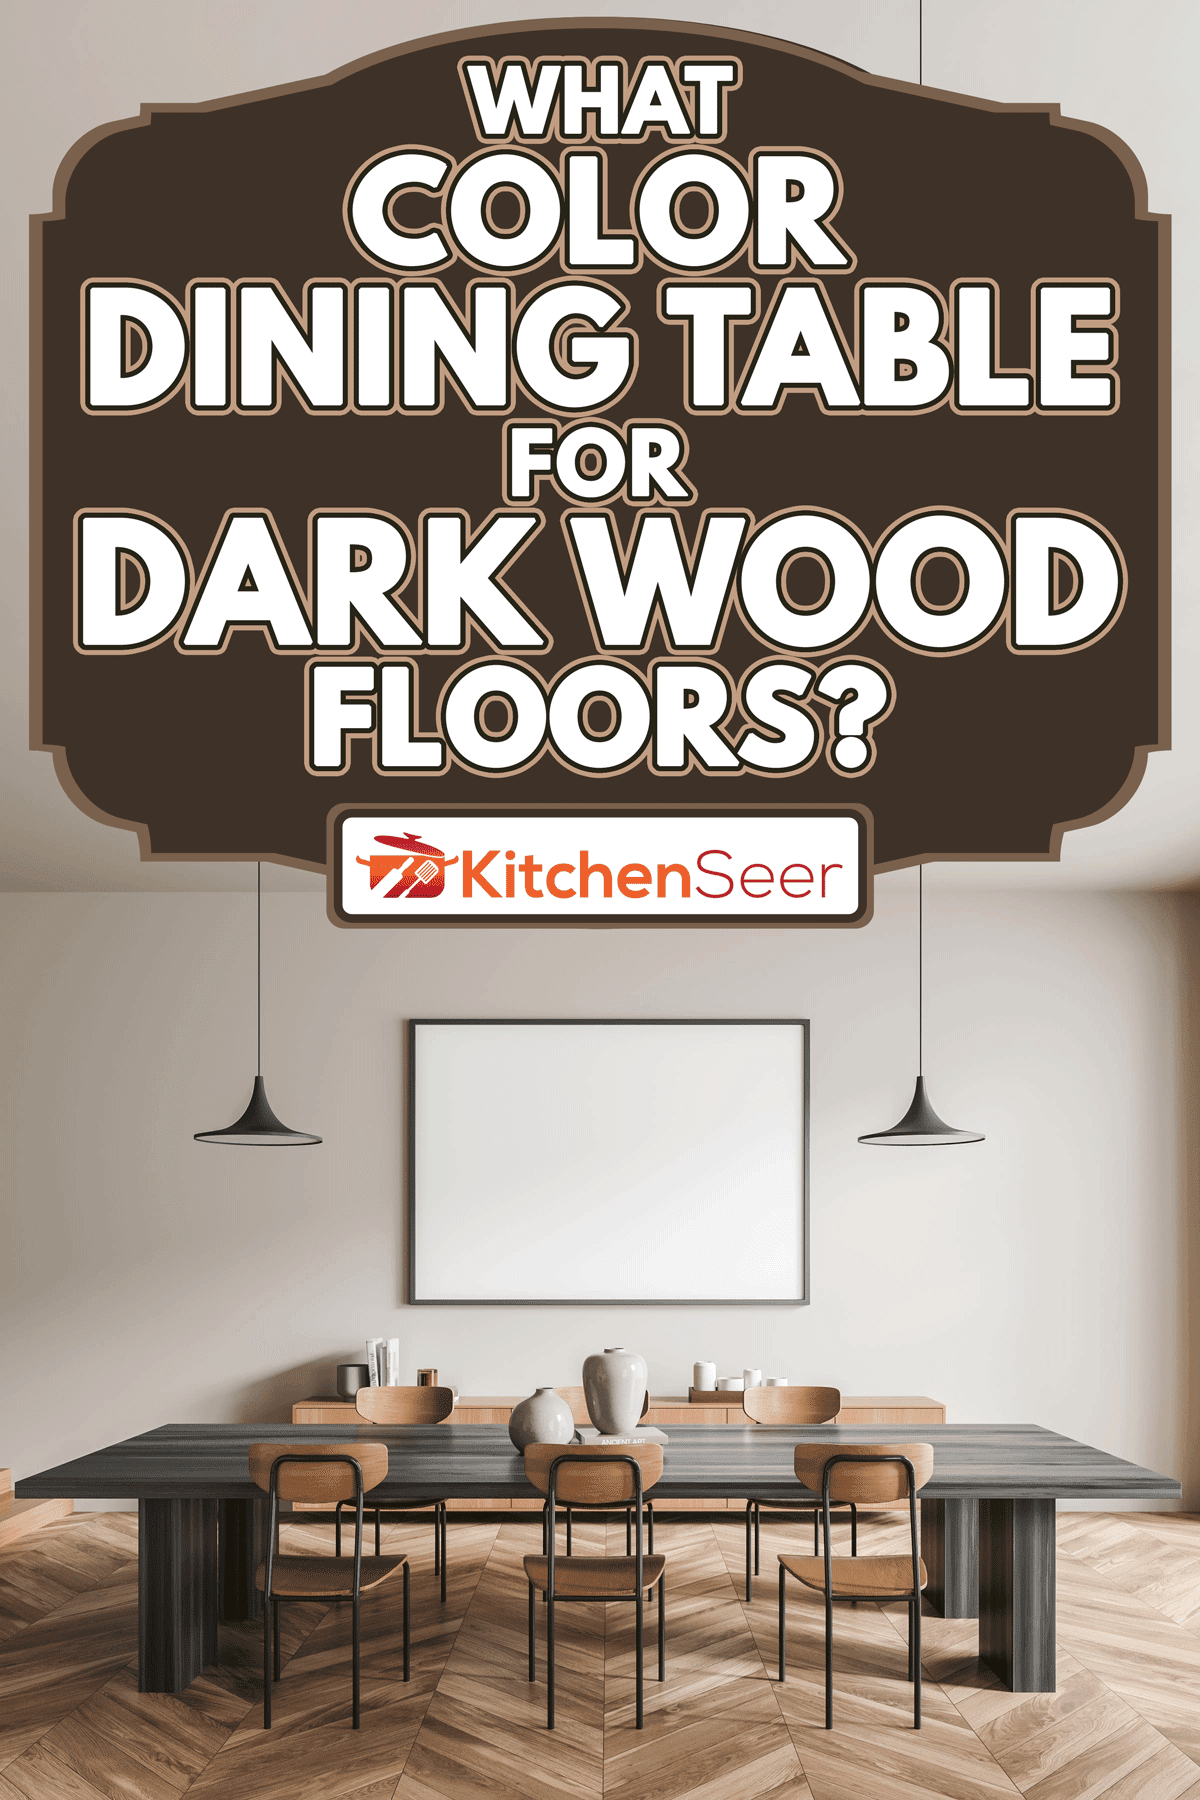 Dining room interior with dark wood table and floor, What Color Dining Table For Dark Wood Floors?